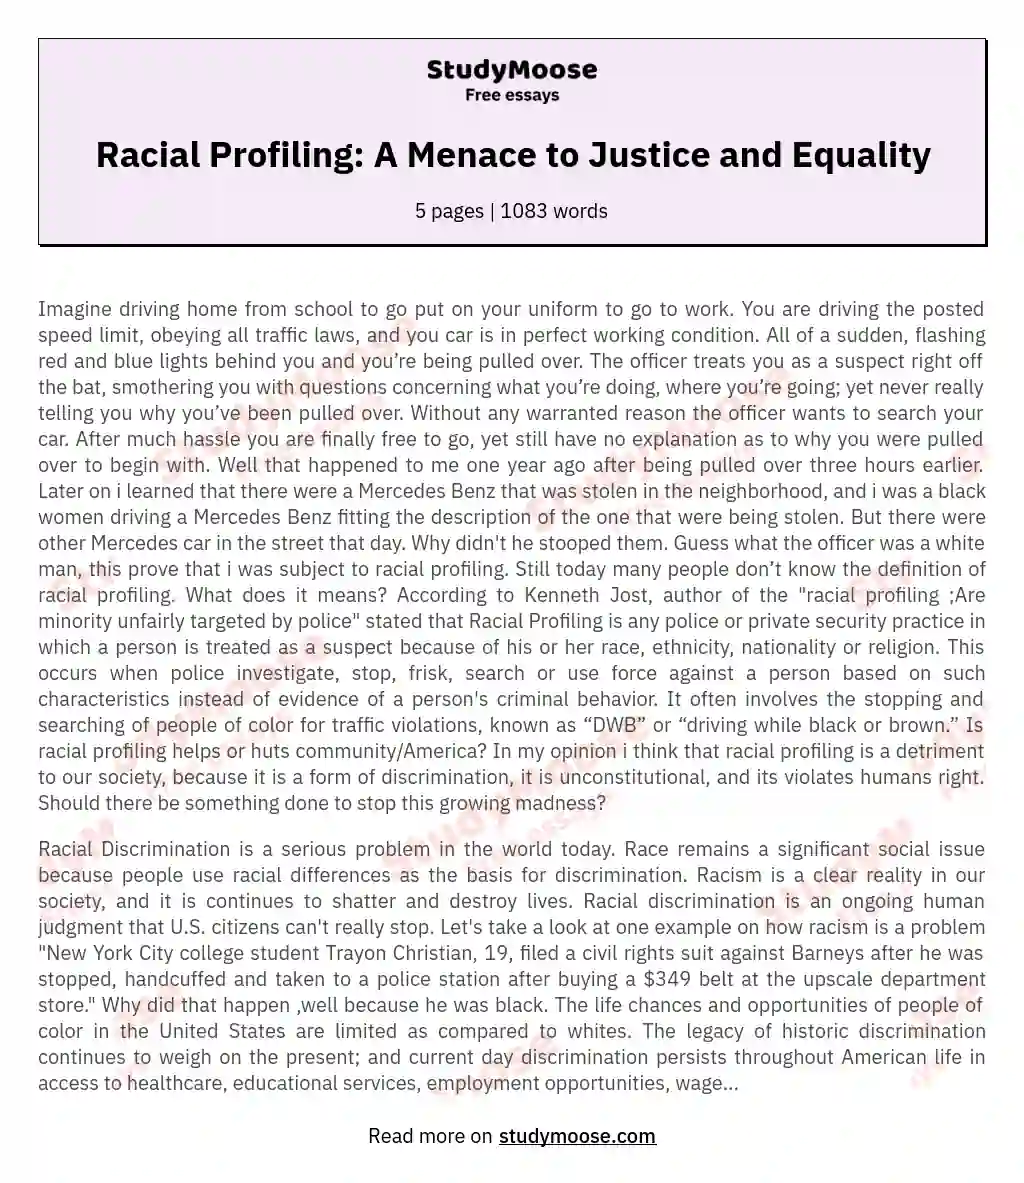 thesis statement on racial profiling